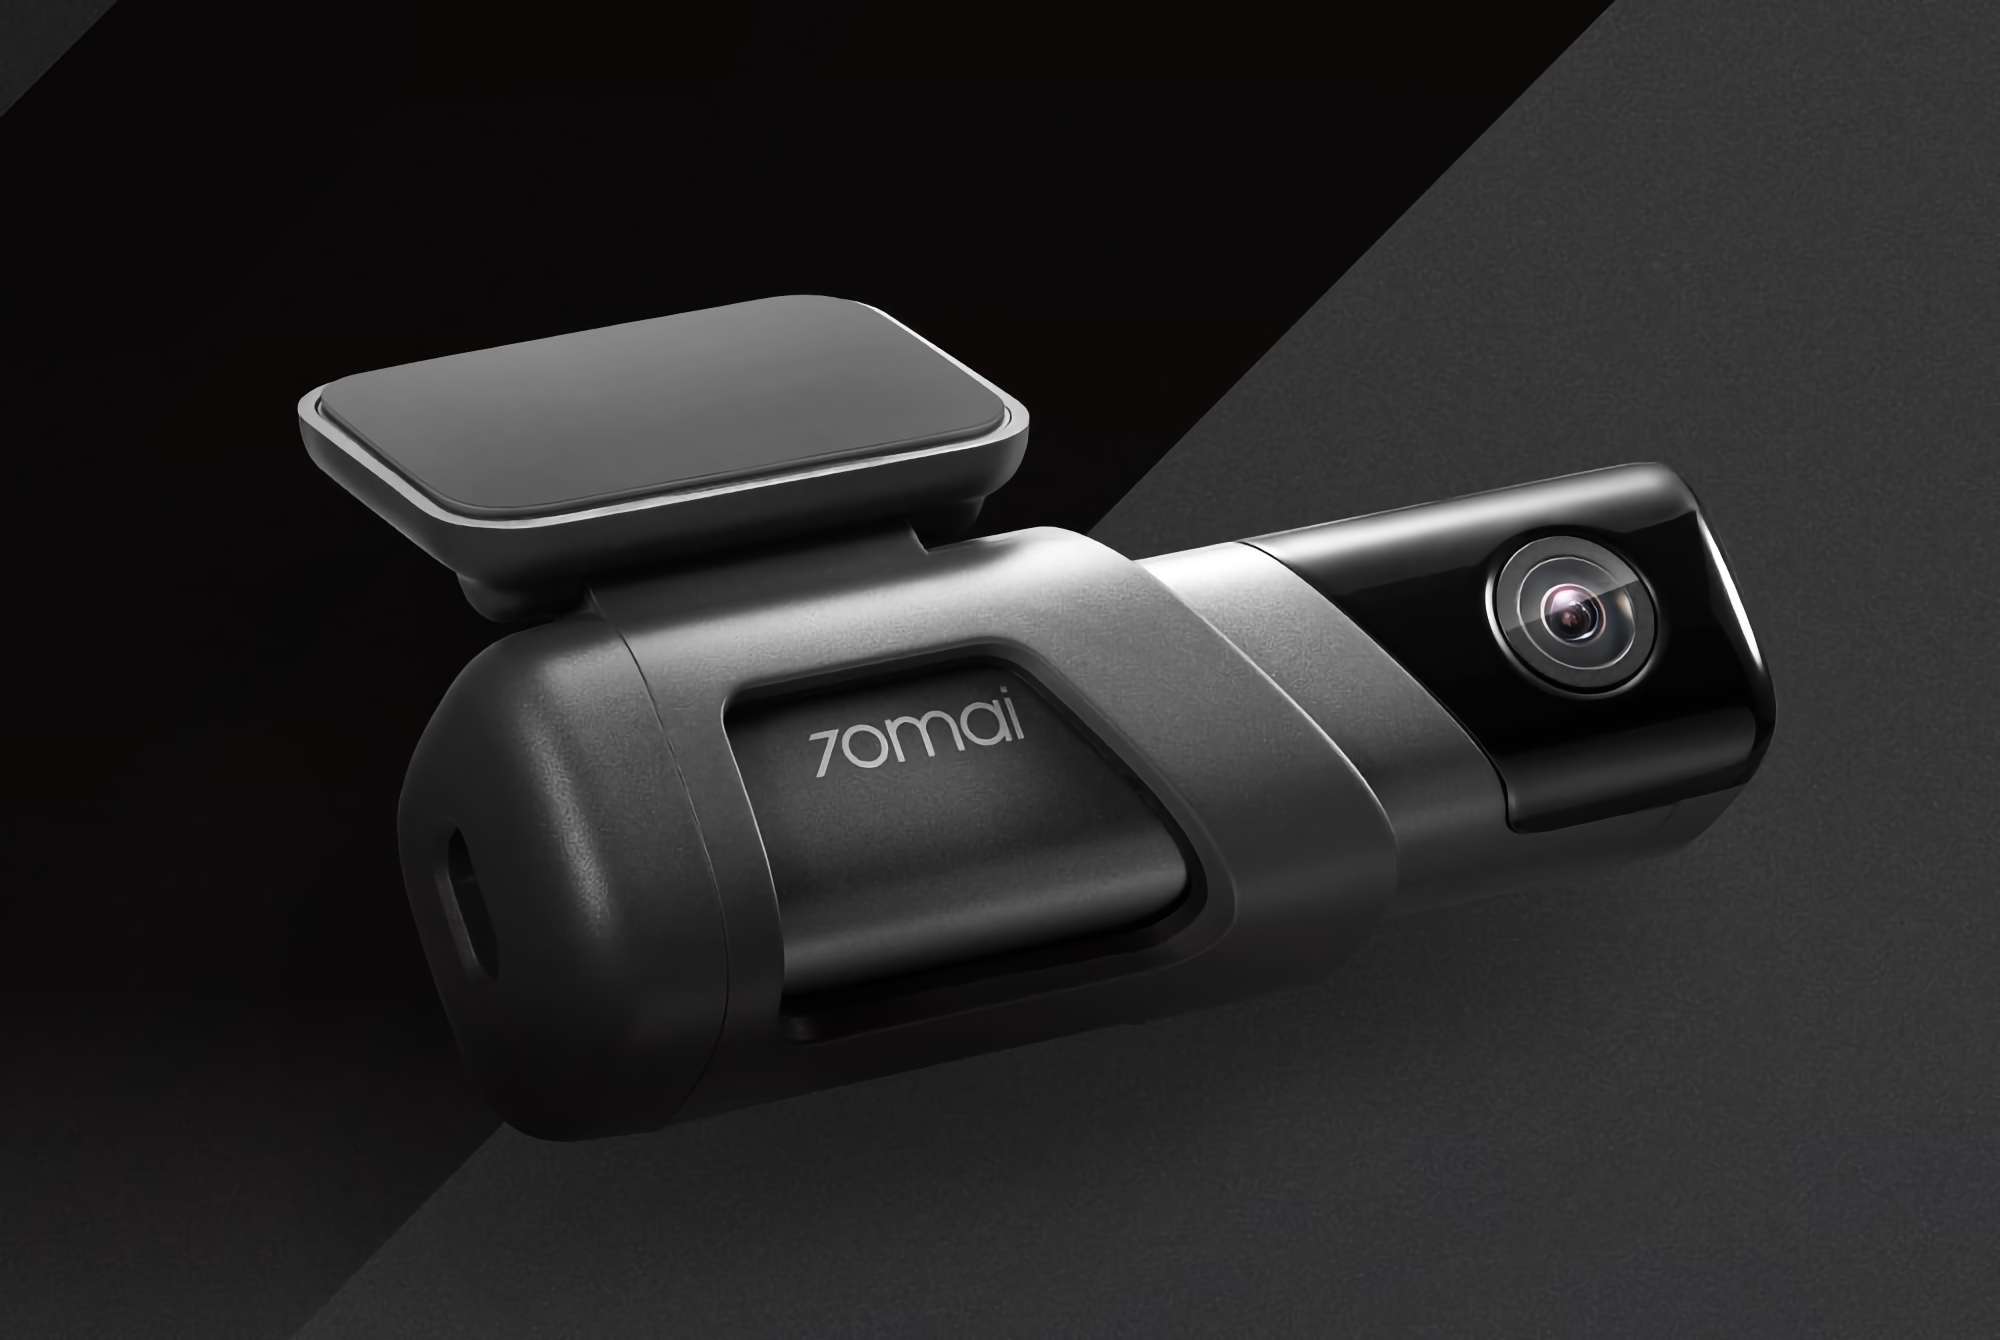 70mai M500: 1944p dash cam with HDR support, 170-degree field of view and built-in GPS